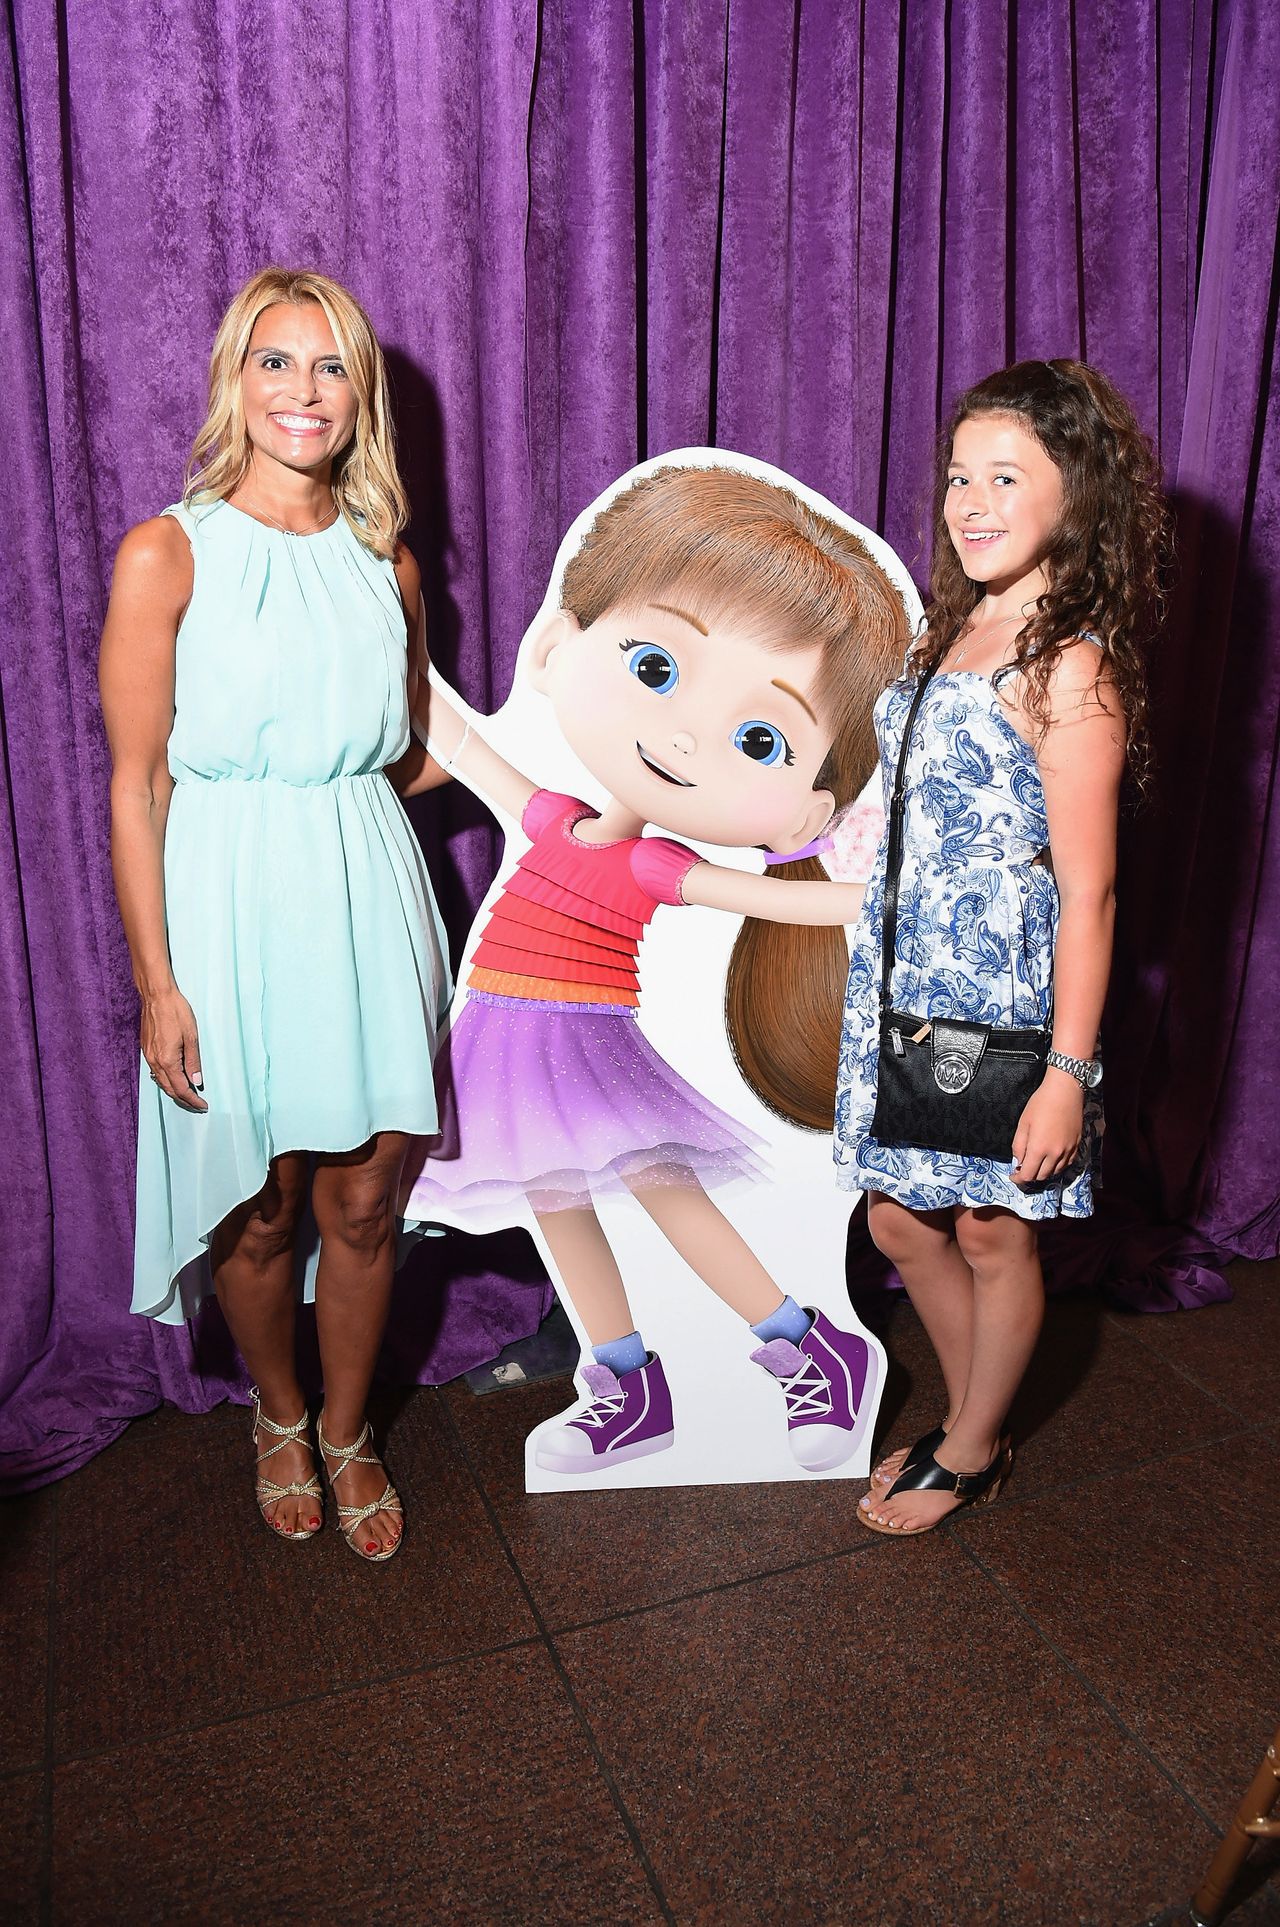 Angela Santomero (left) and actress Addison Holley attend the premiere screening event for her Amazon Original Kids Series "Wishenpoof" in August 2015 in New York City.